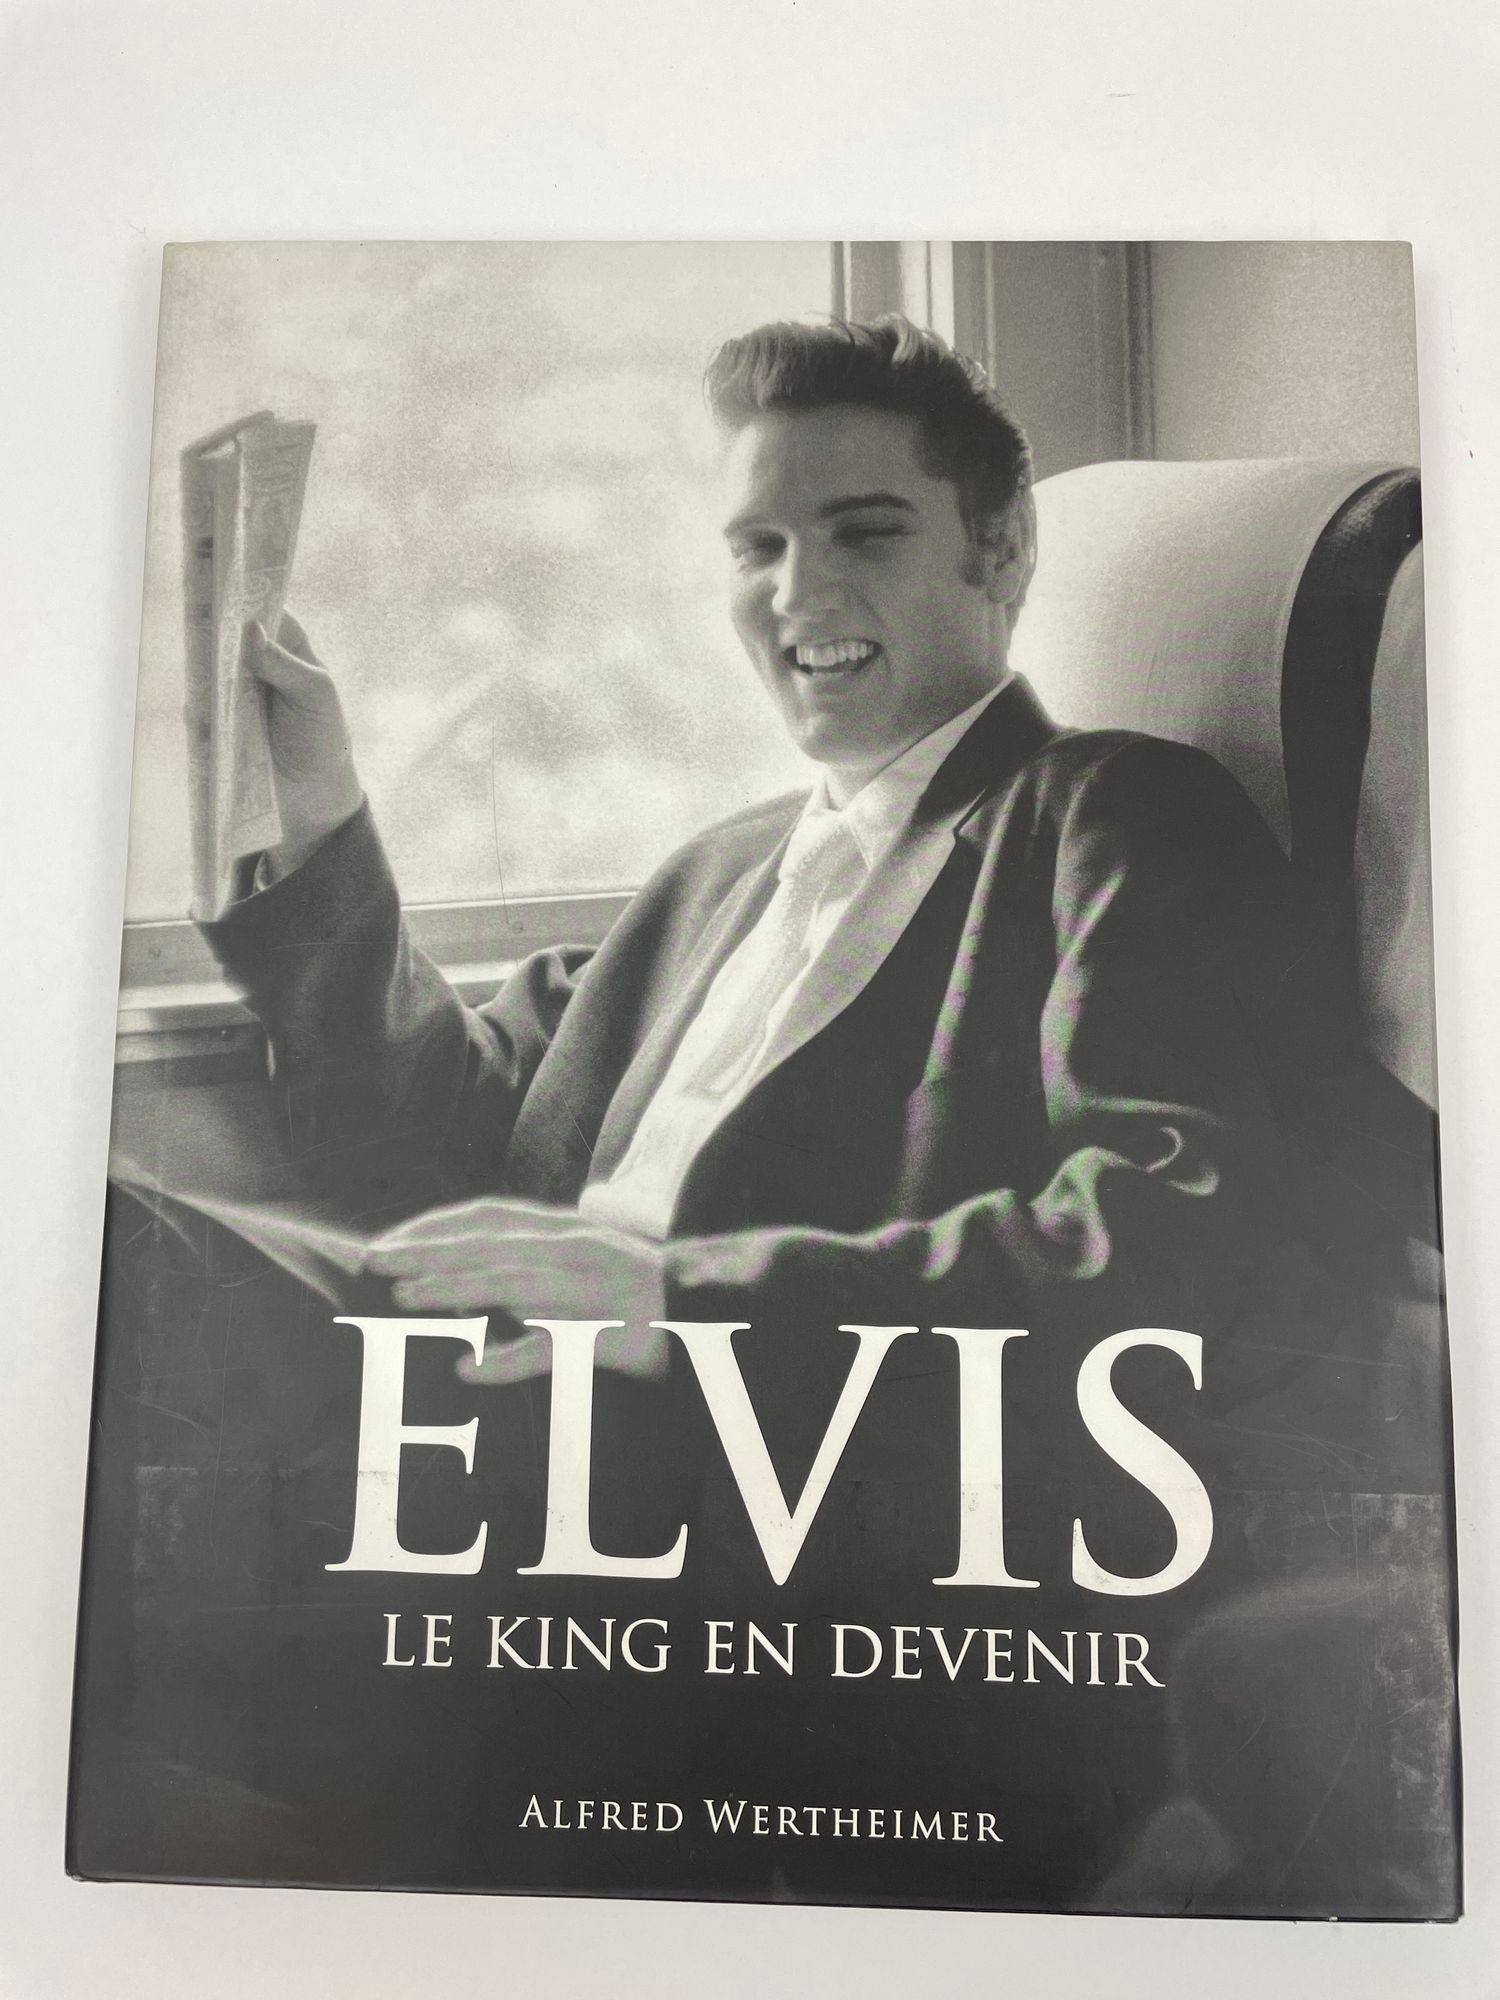 ELvis: A King in the Making Hardcover – 1st Edition 2006 by Alfred Wertheimer (Author), Peter Guralnick (Author).From the Estate of the famous fashion designer Christian Audigier Beverly Hills California.
This volume contains a true treasure trove